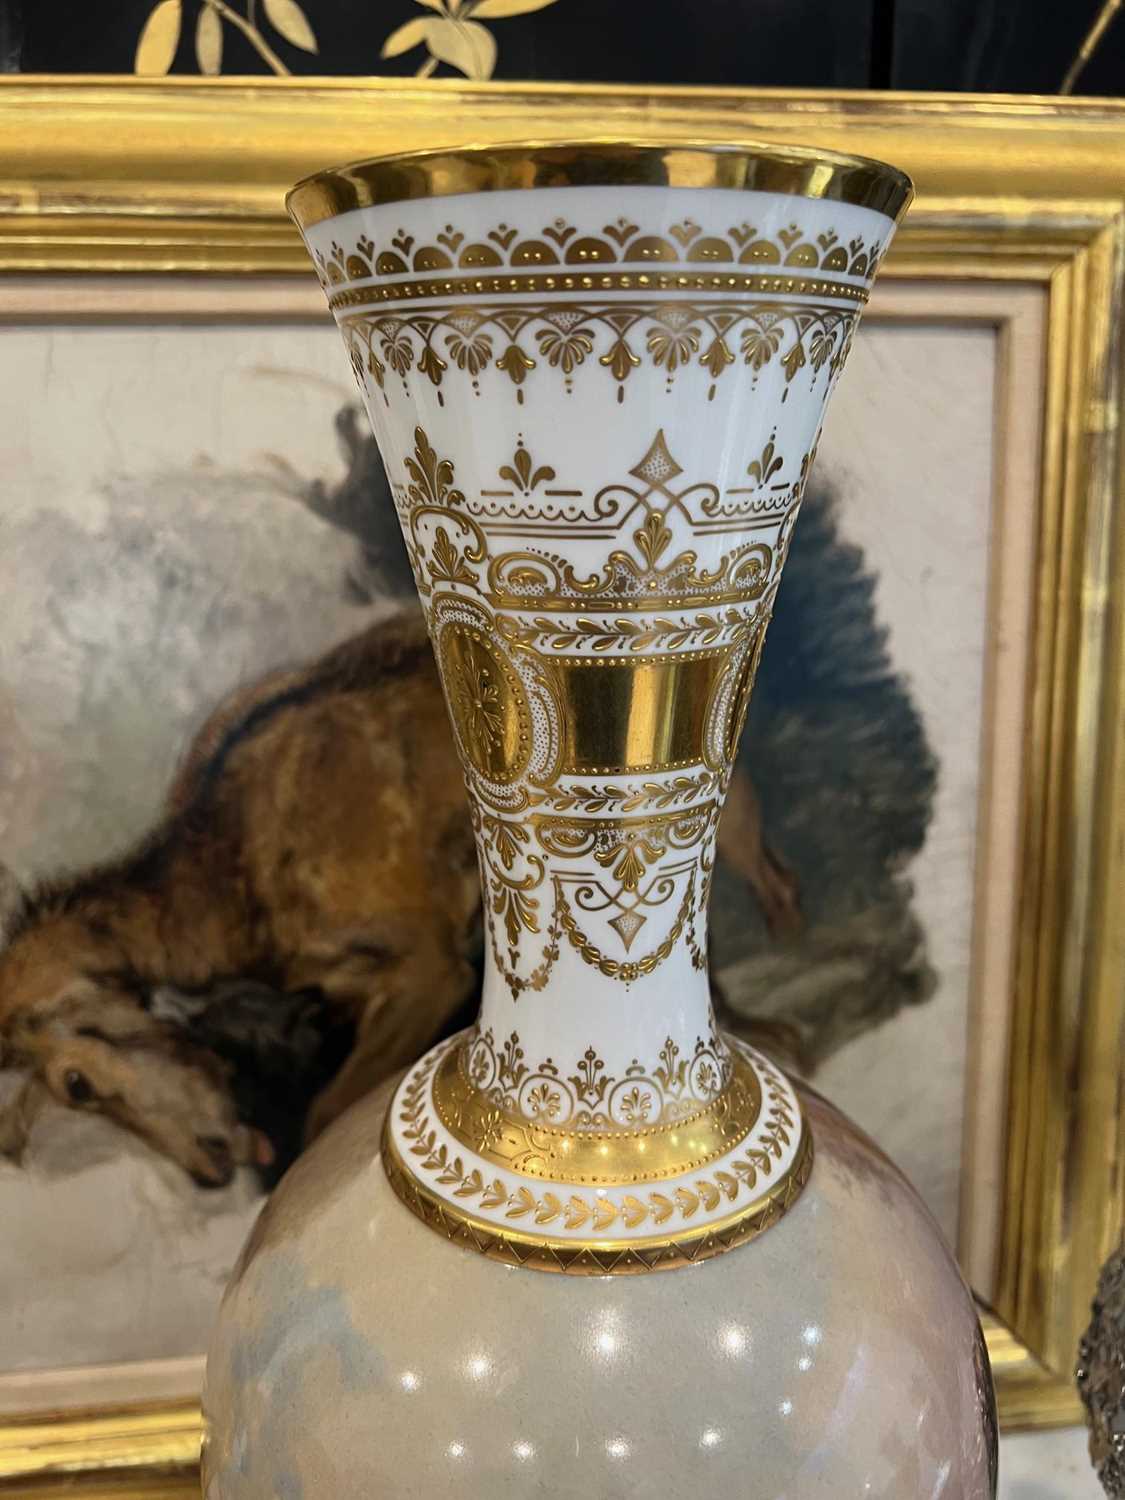 A FINE 19TH CENTURY ROYAL VIENNA PORCELAIN AND ORMOLU MOUNTED VASE 'THE FRUIT SELLER' - Image 9 of 12